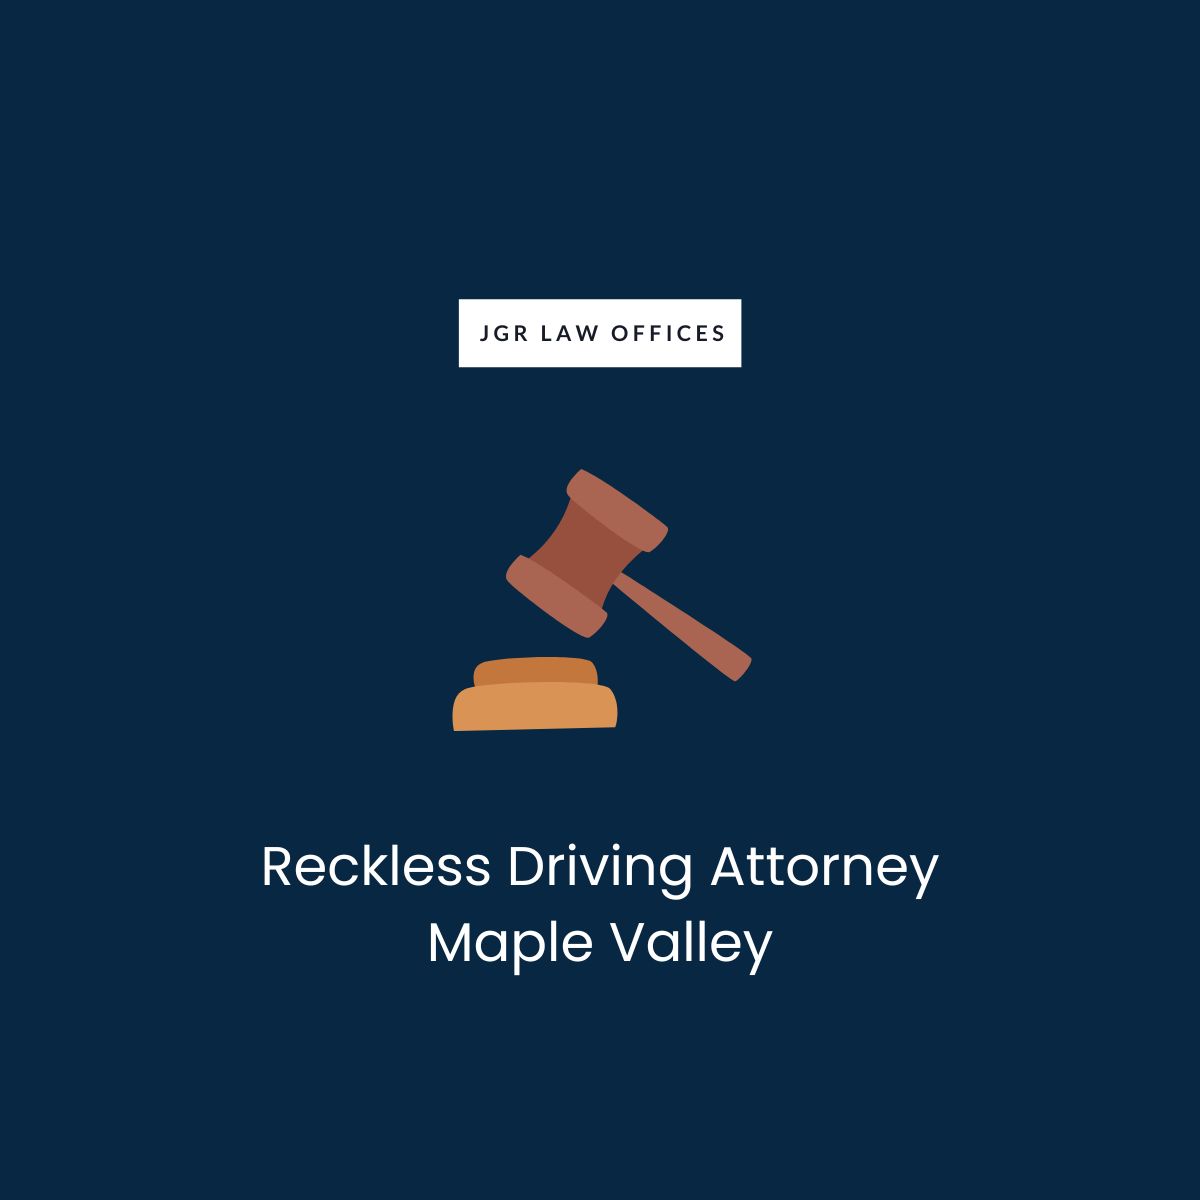 Reckless Driving Attorney Maple Valley Reckless Driving Reckless Driving